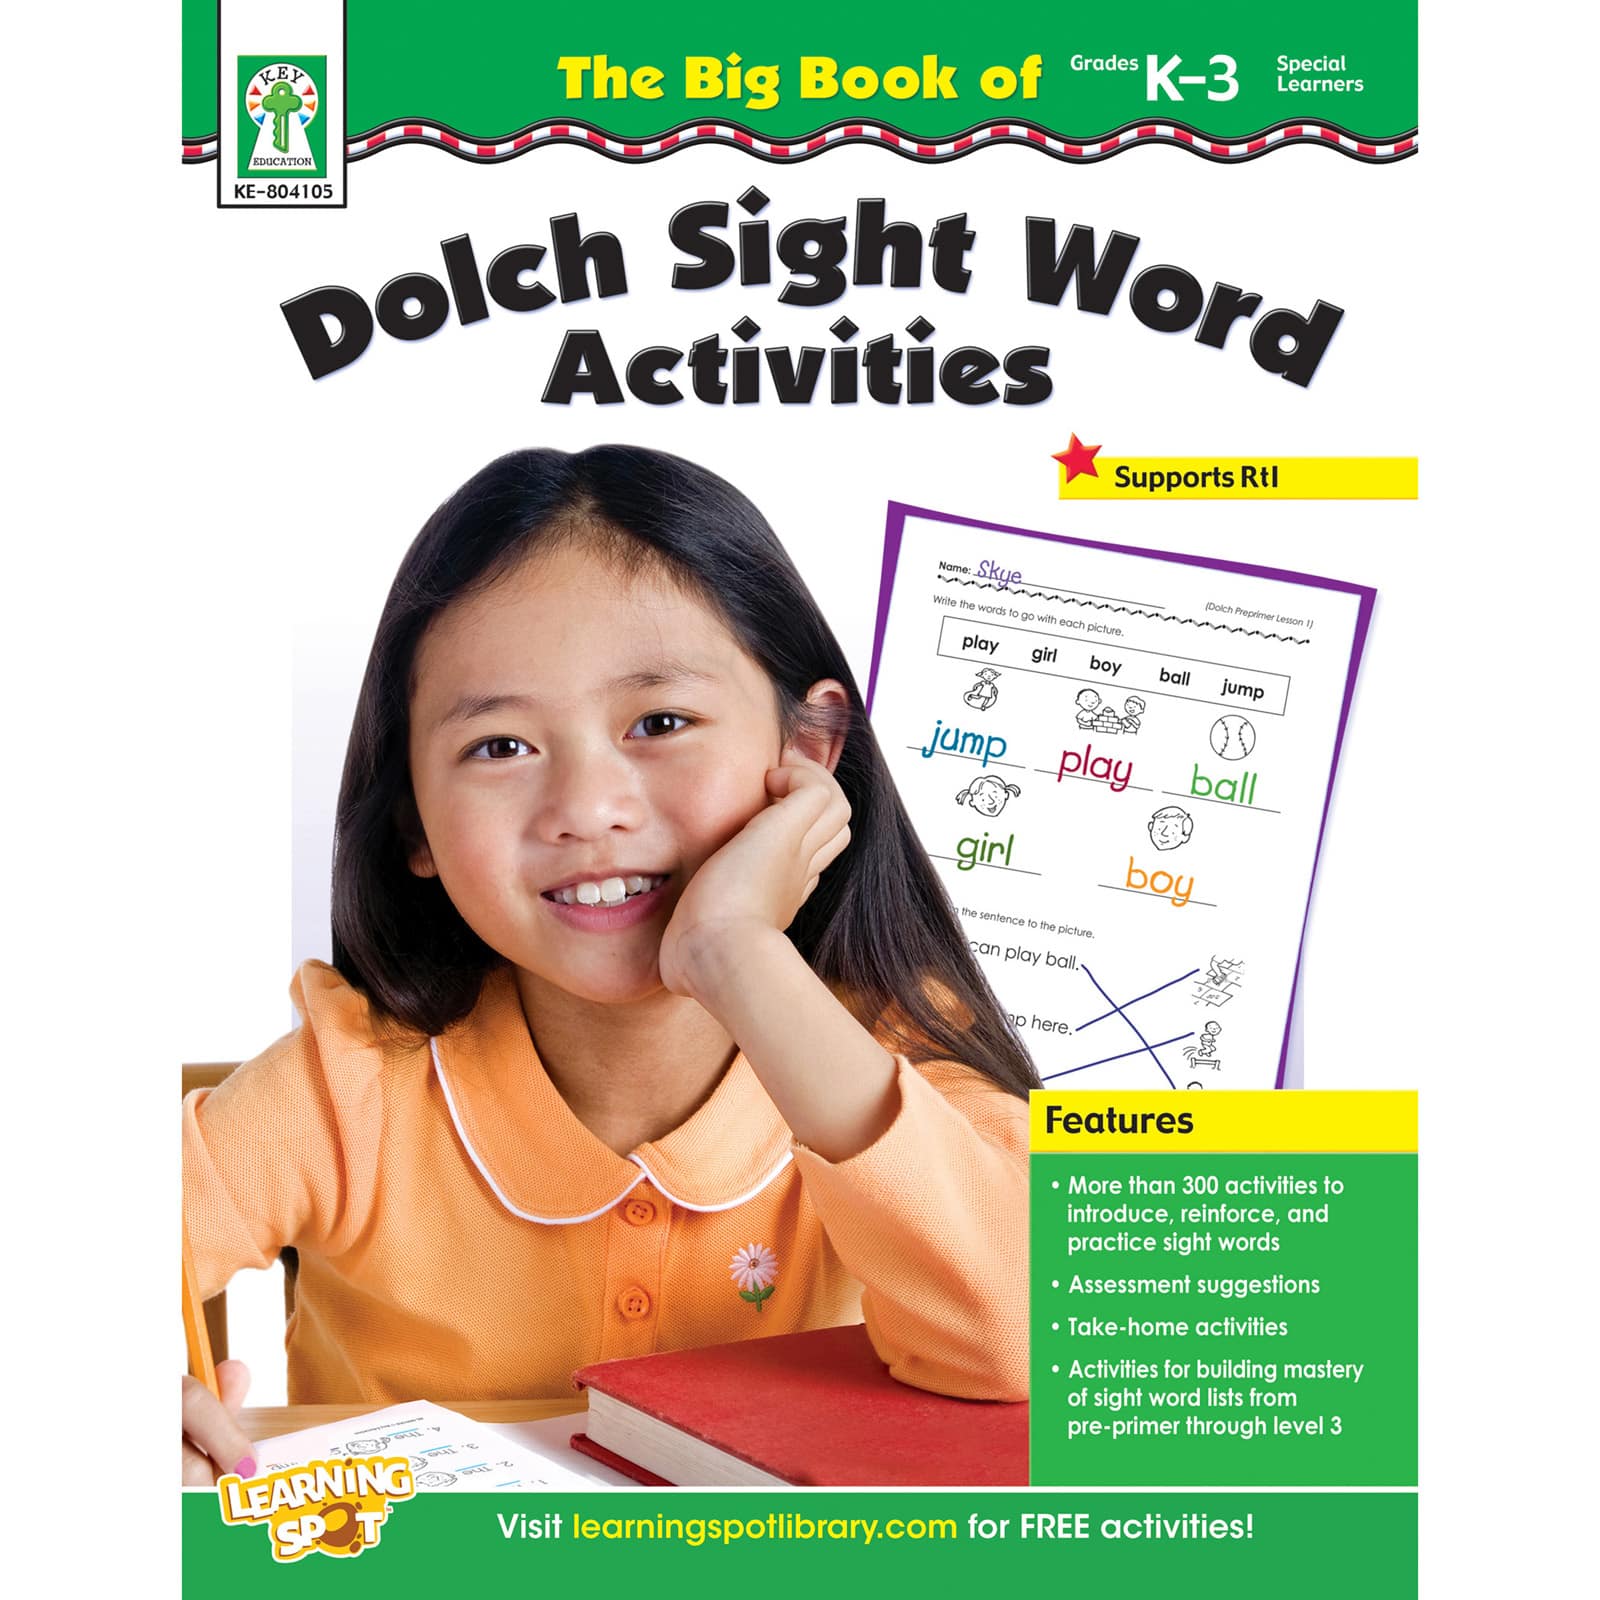 The Big Book of Dolch Sight Word Activities Resource Book, Grade K-3